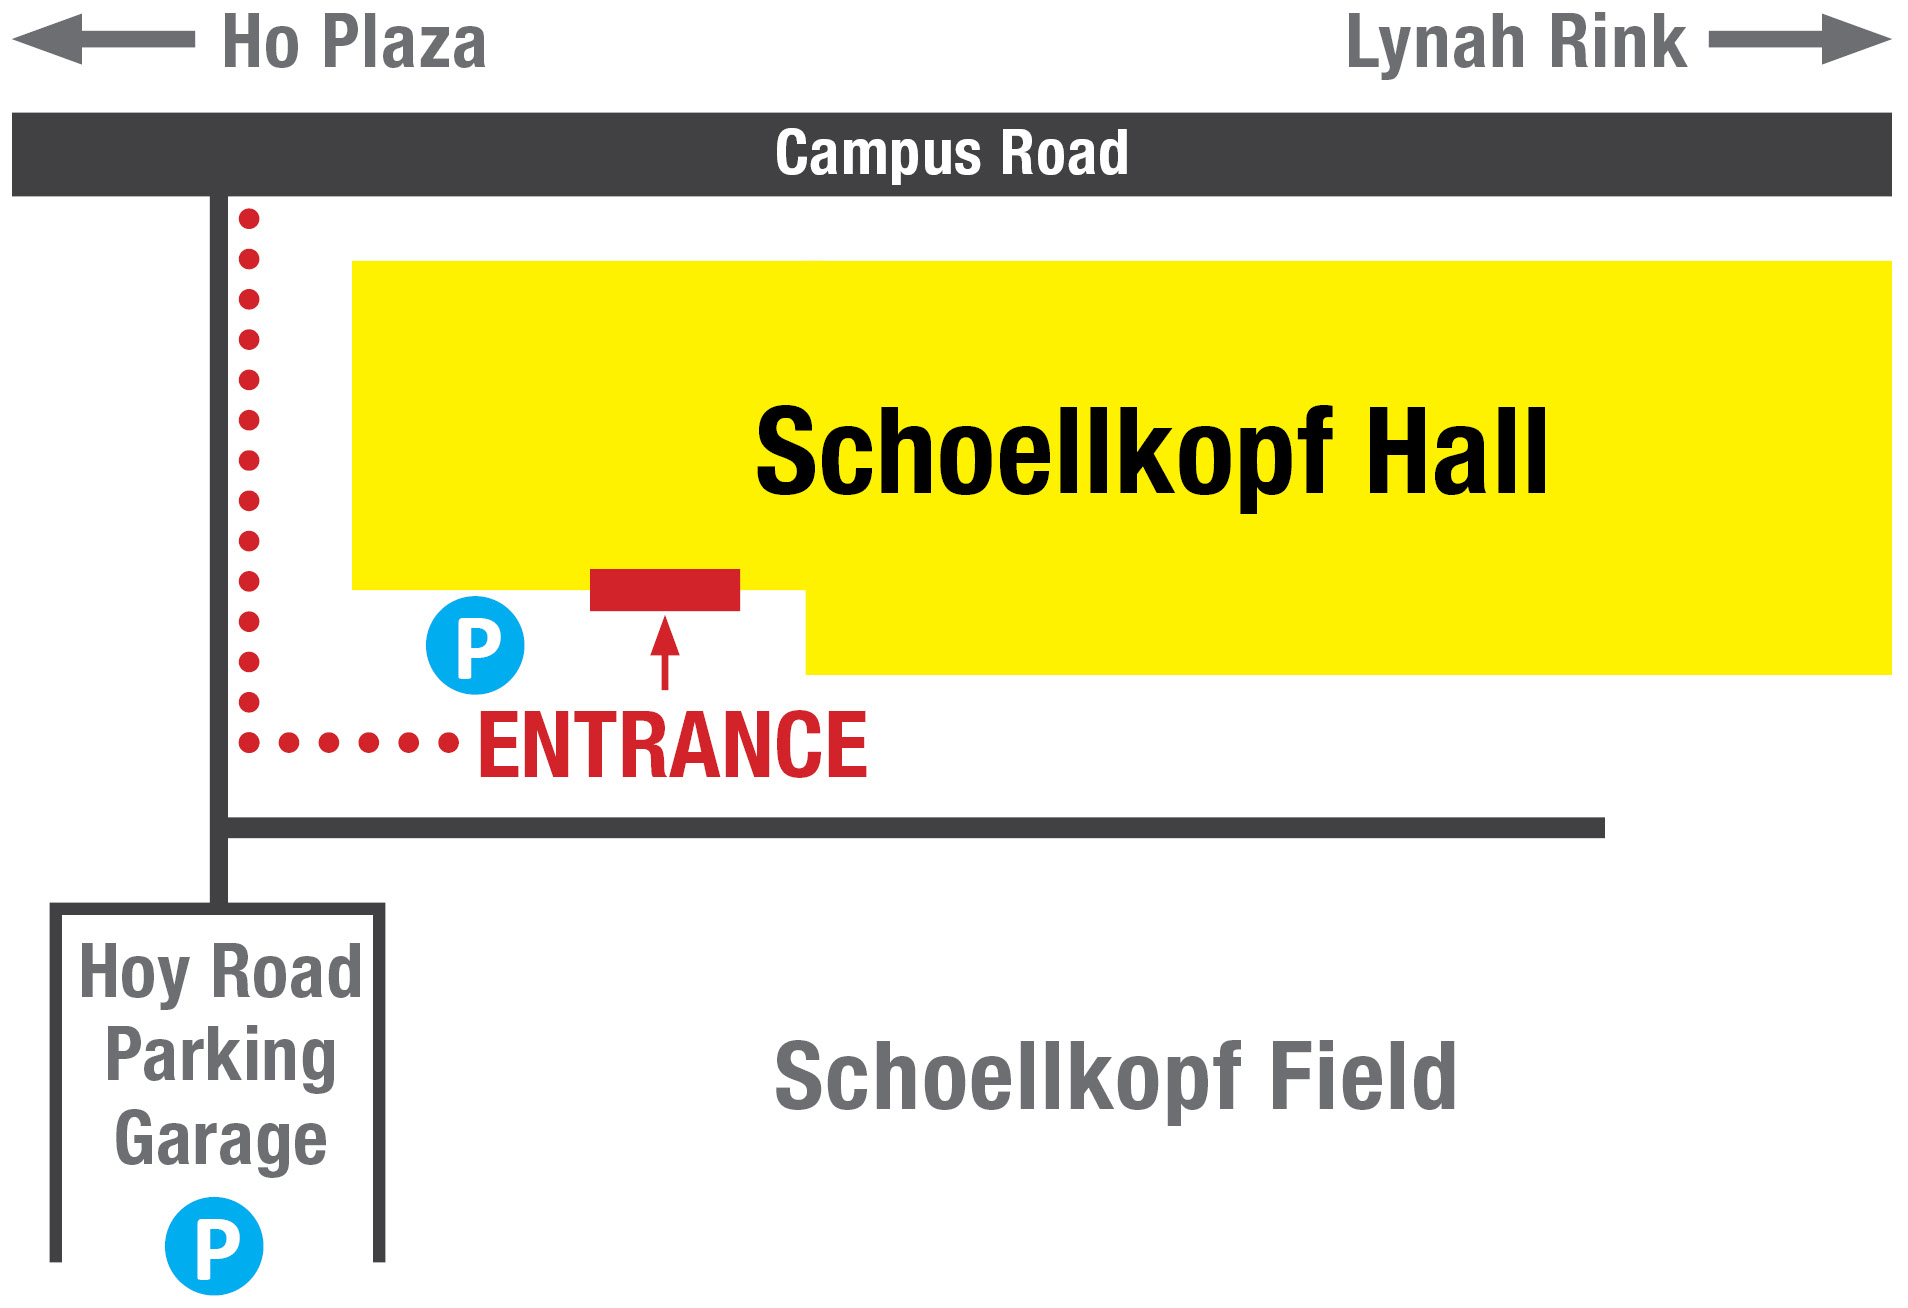 Map of Schoellkopf Hall at 521 Campus Road with entrance at back of building facing parking garage